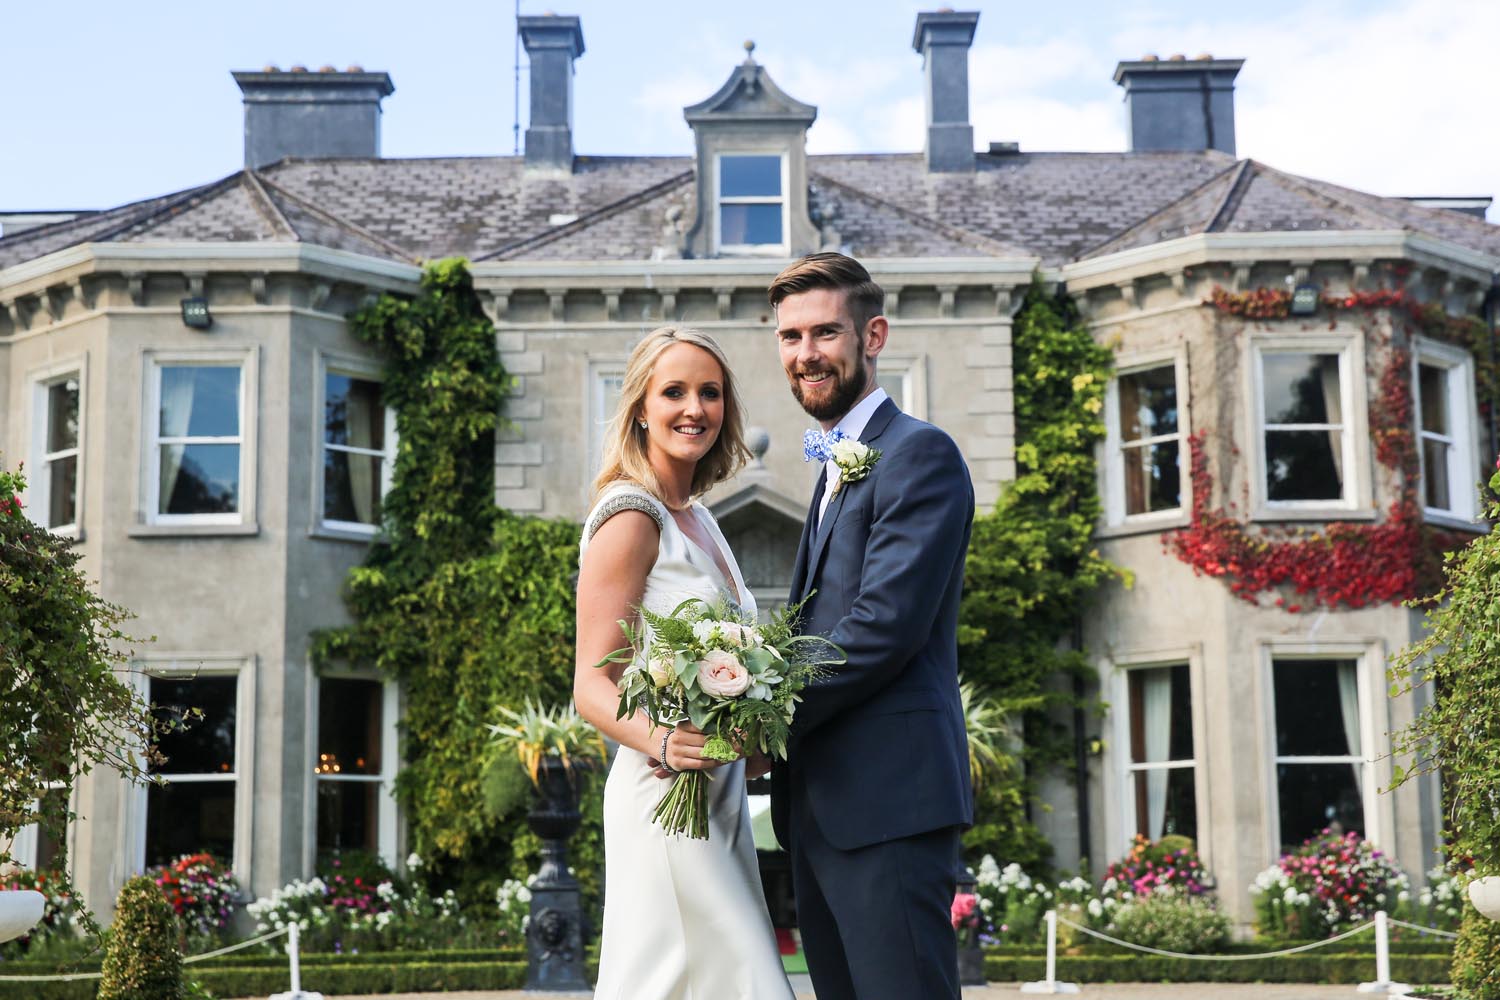 Married couple embracing in front of Tinakilly House, Co. Wicklow